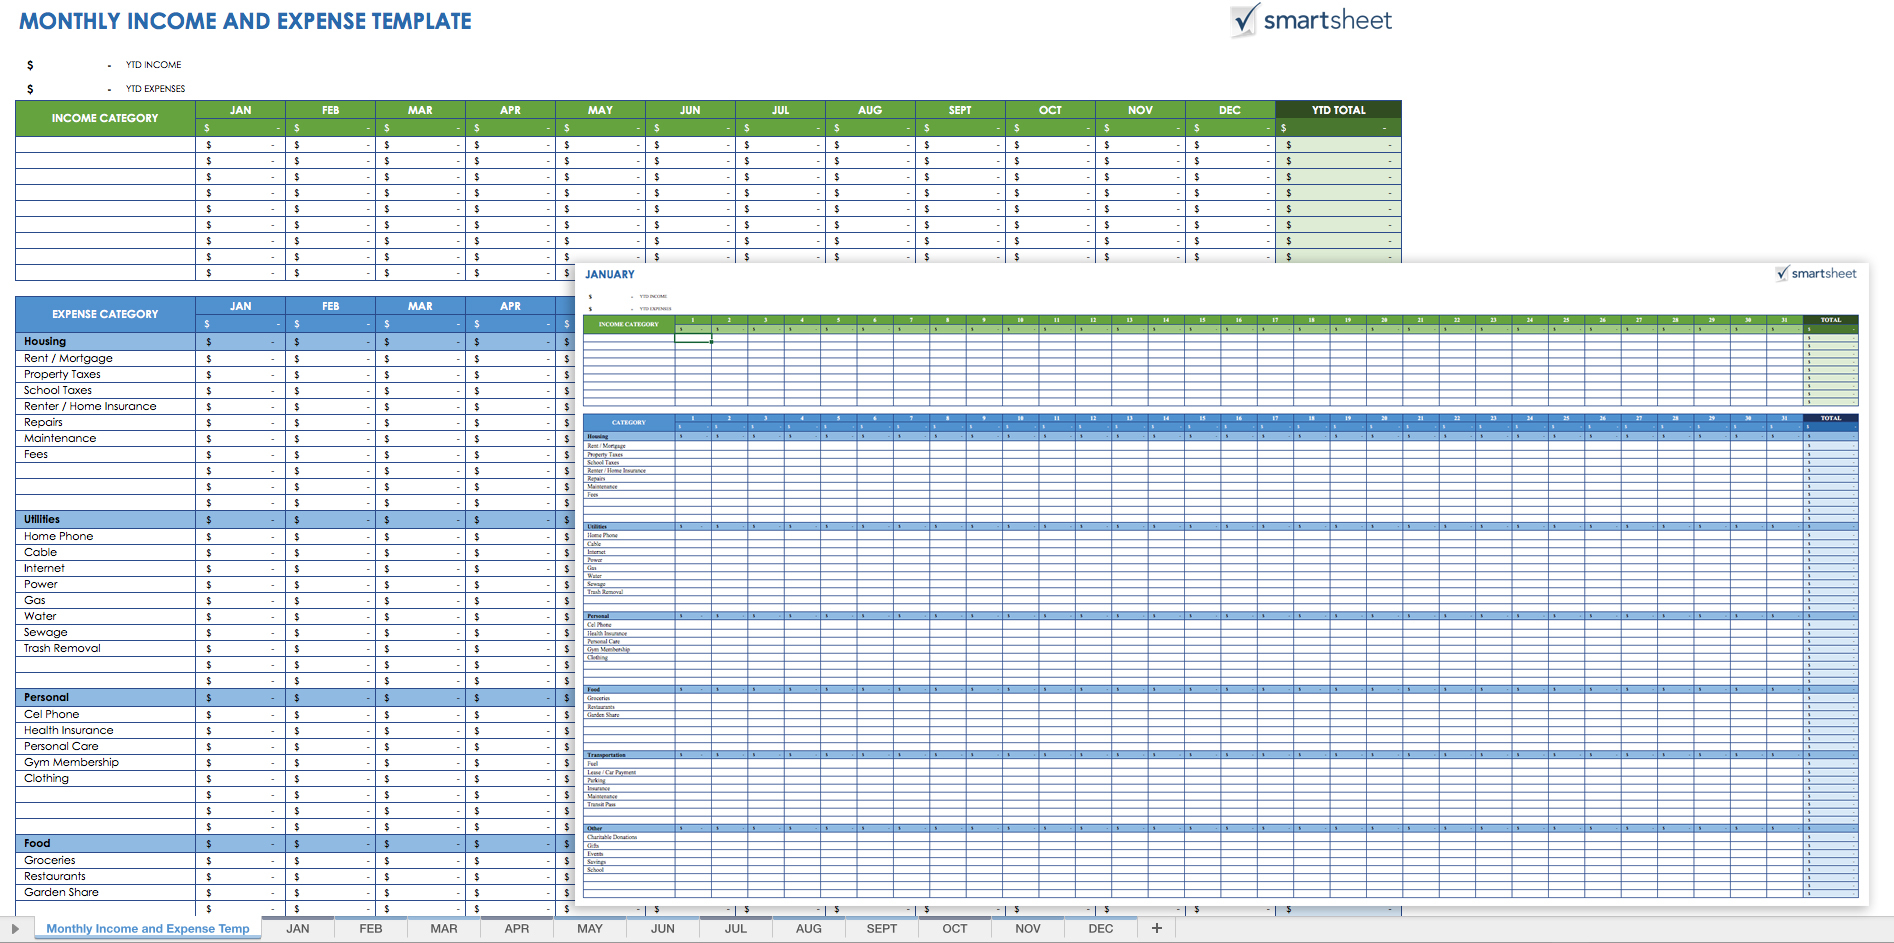 Free Expense Report Templates Smartsheet intended for Home Budget Spreadsheet Free